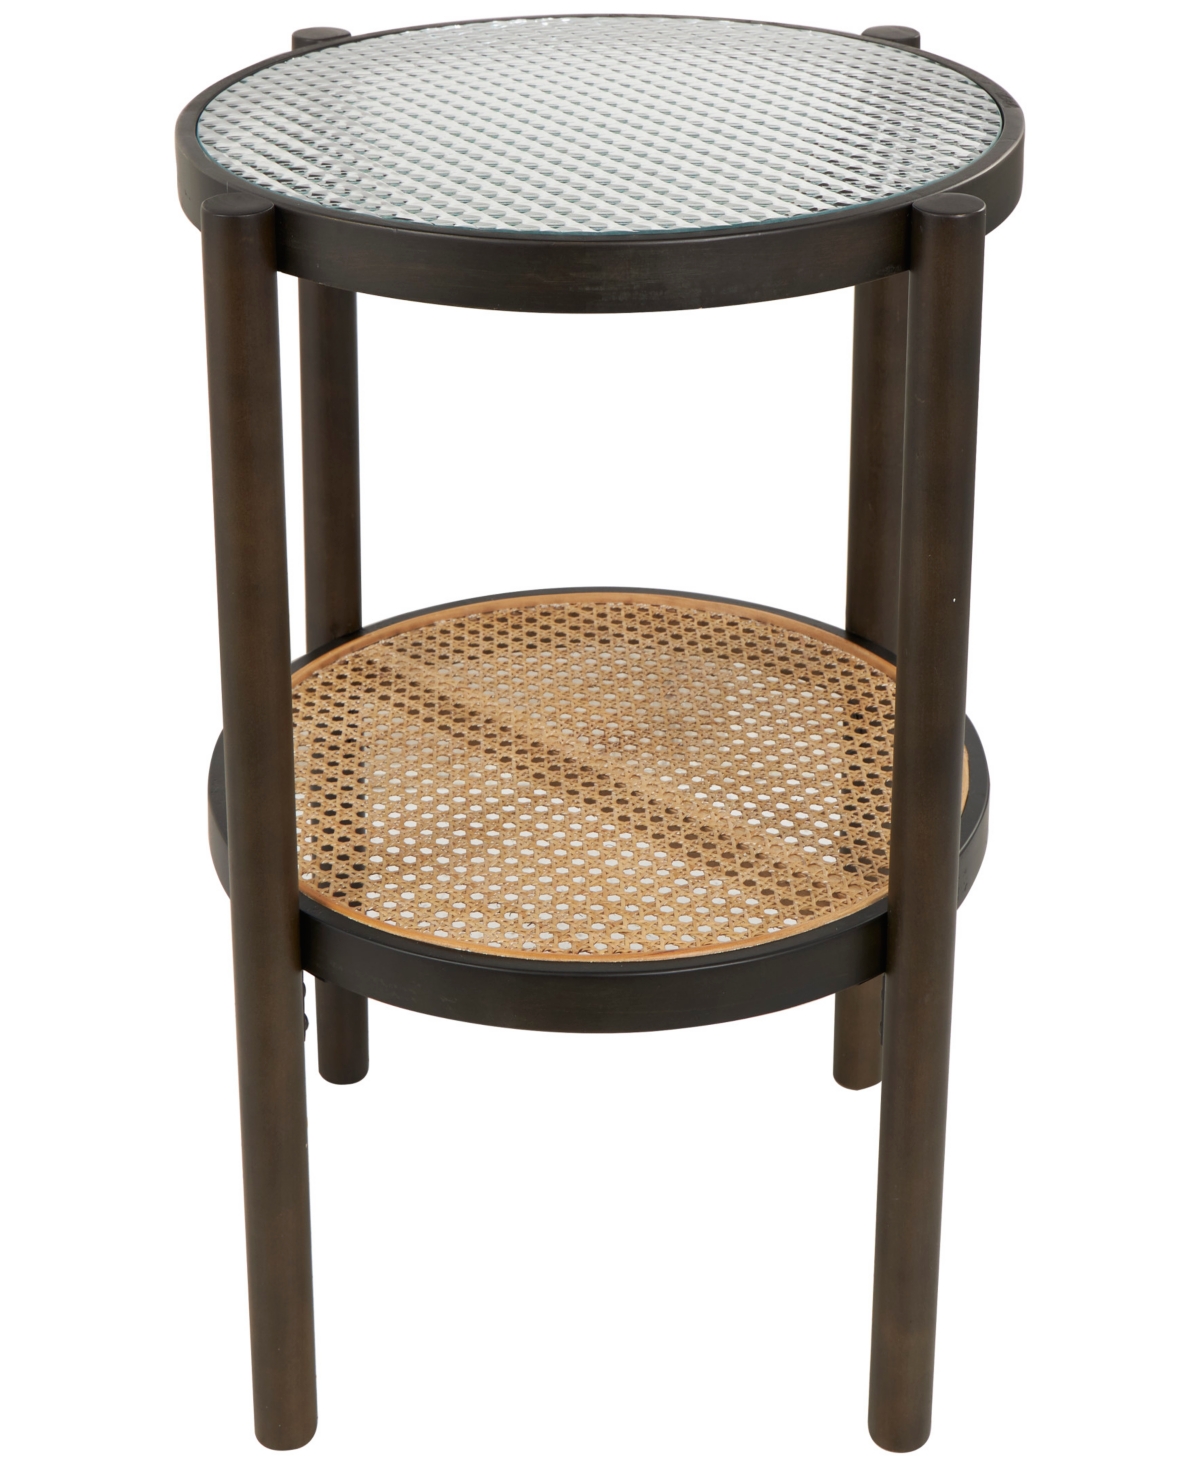 Rosemary Lane 19" X 19" X 24" Rattan Pressed Tempered Glass Top Accent Table In Brown